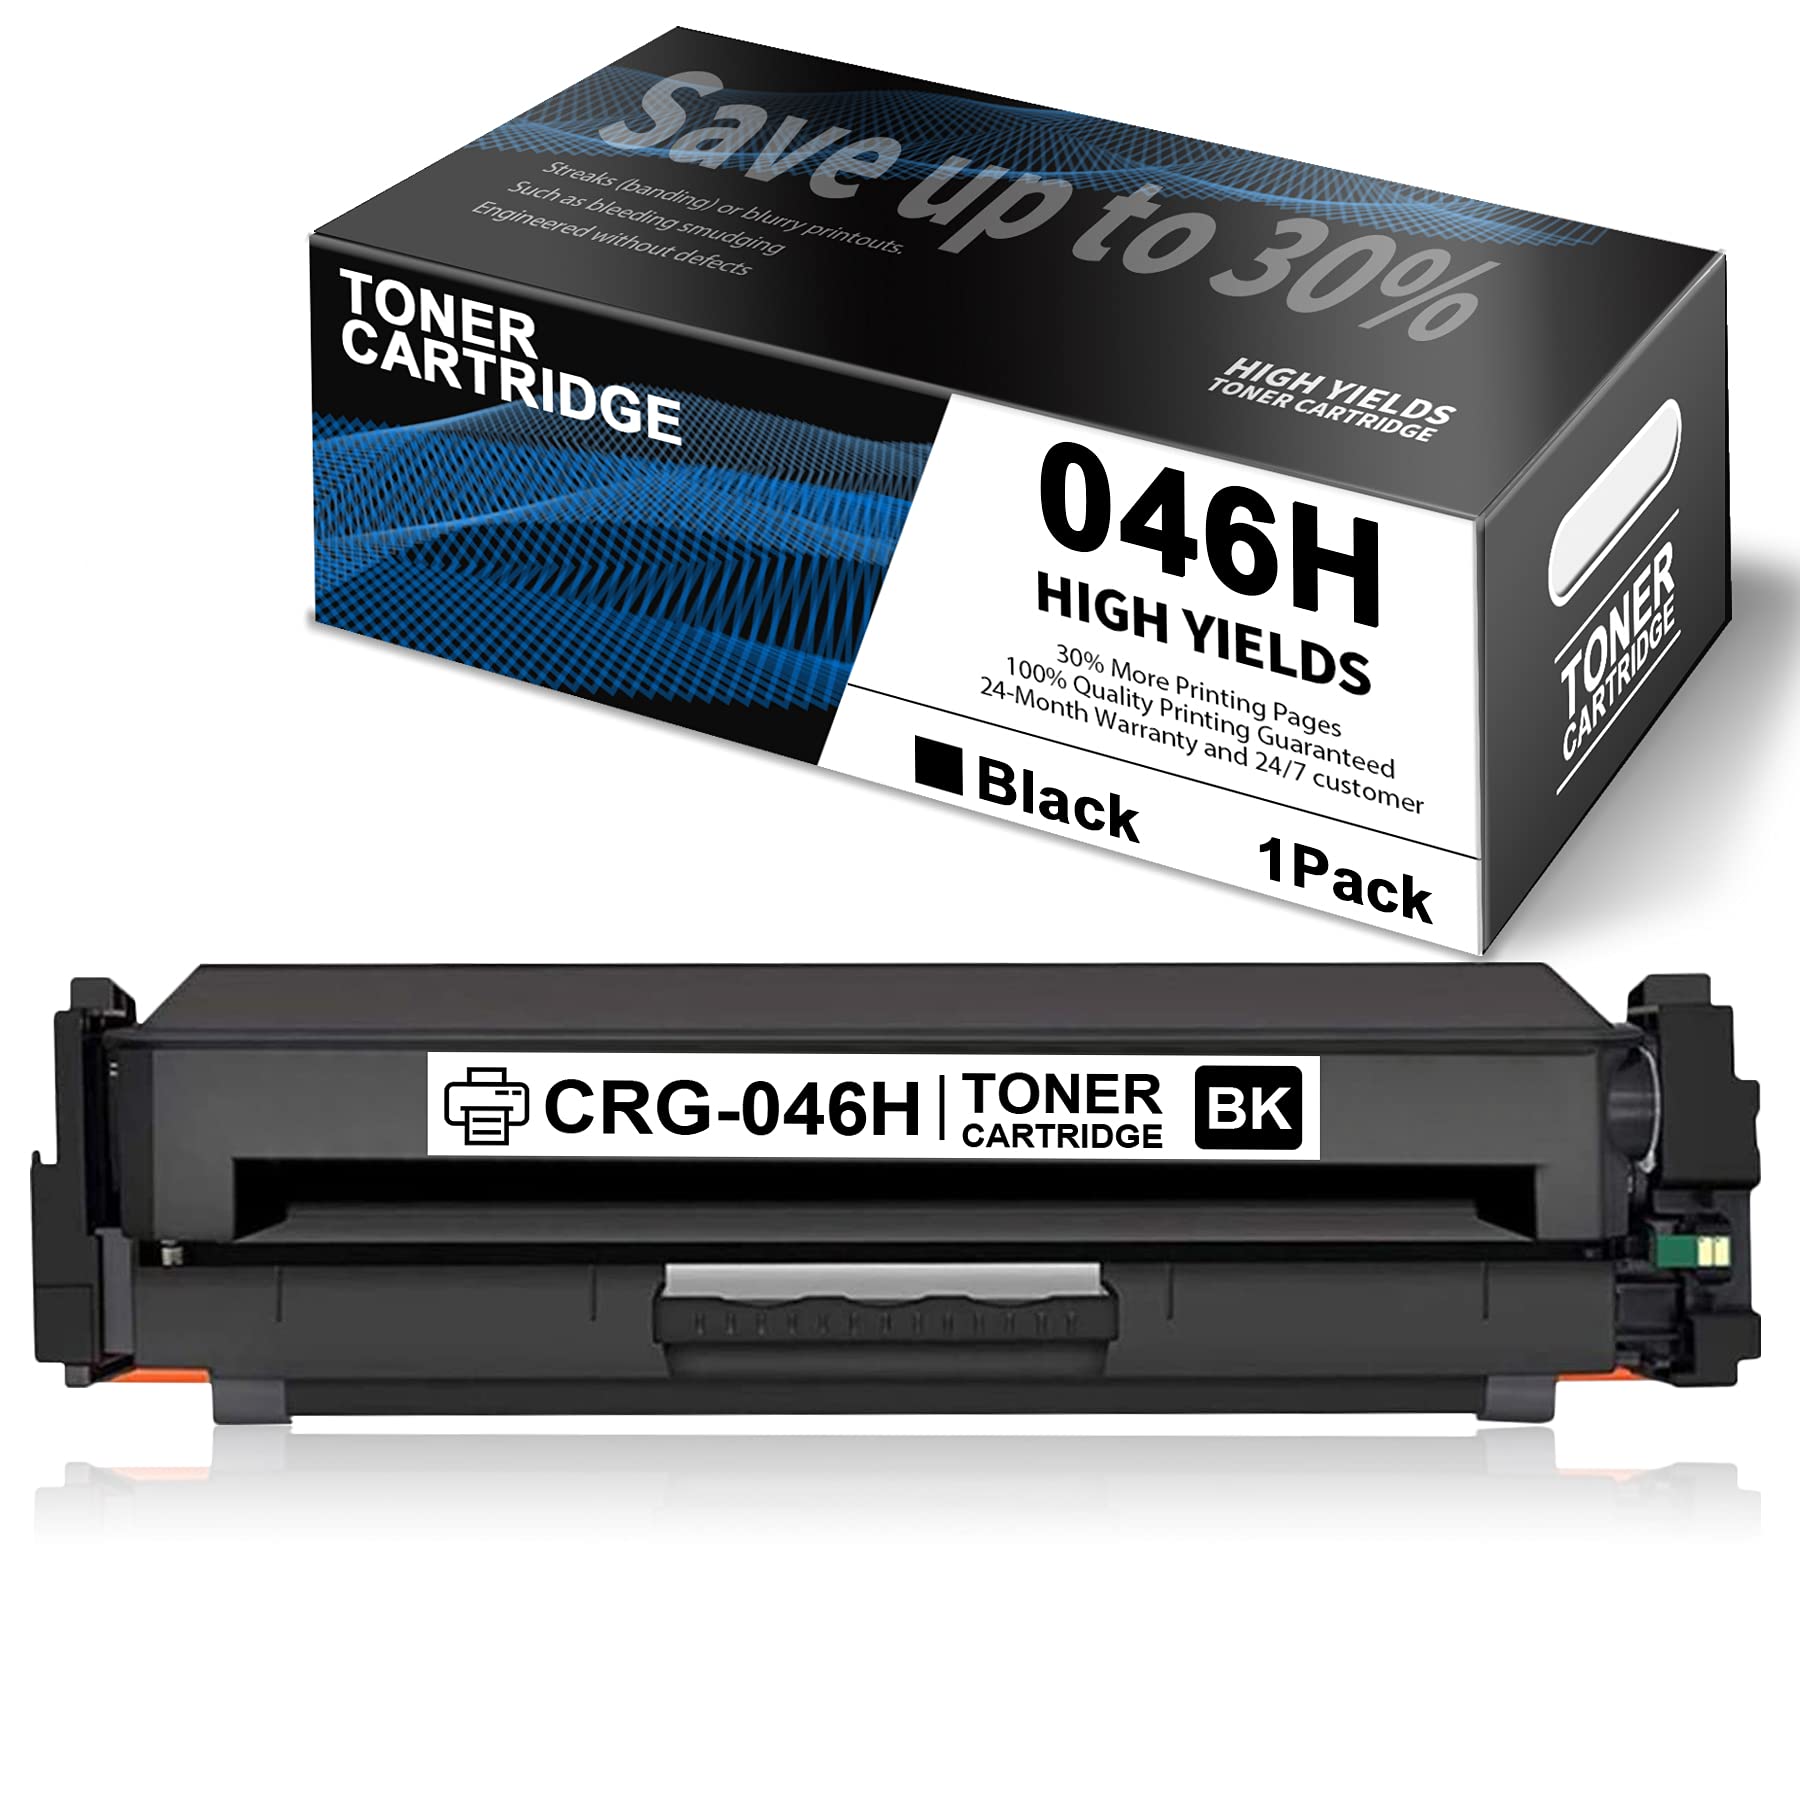 1 Pack Black 046H Toner Compatible for Cartridge 046H Toner Cartridge Replacement for CRG-046H Color Image Class LBP654Cdw MF735Cdw MF731Cdw MF733C...